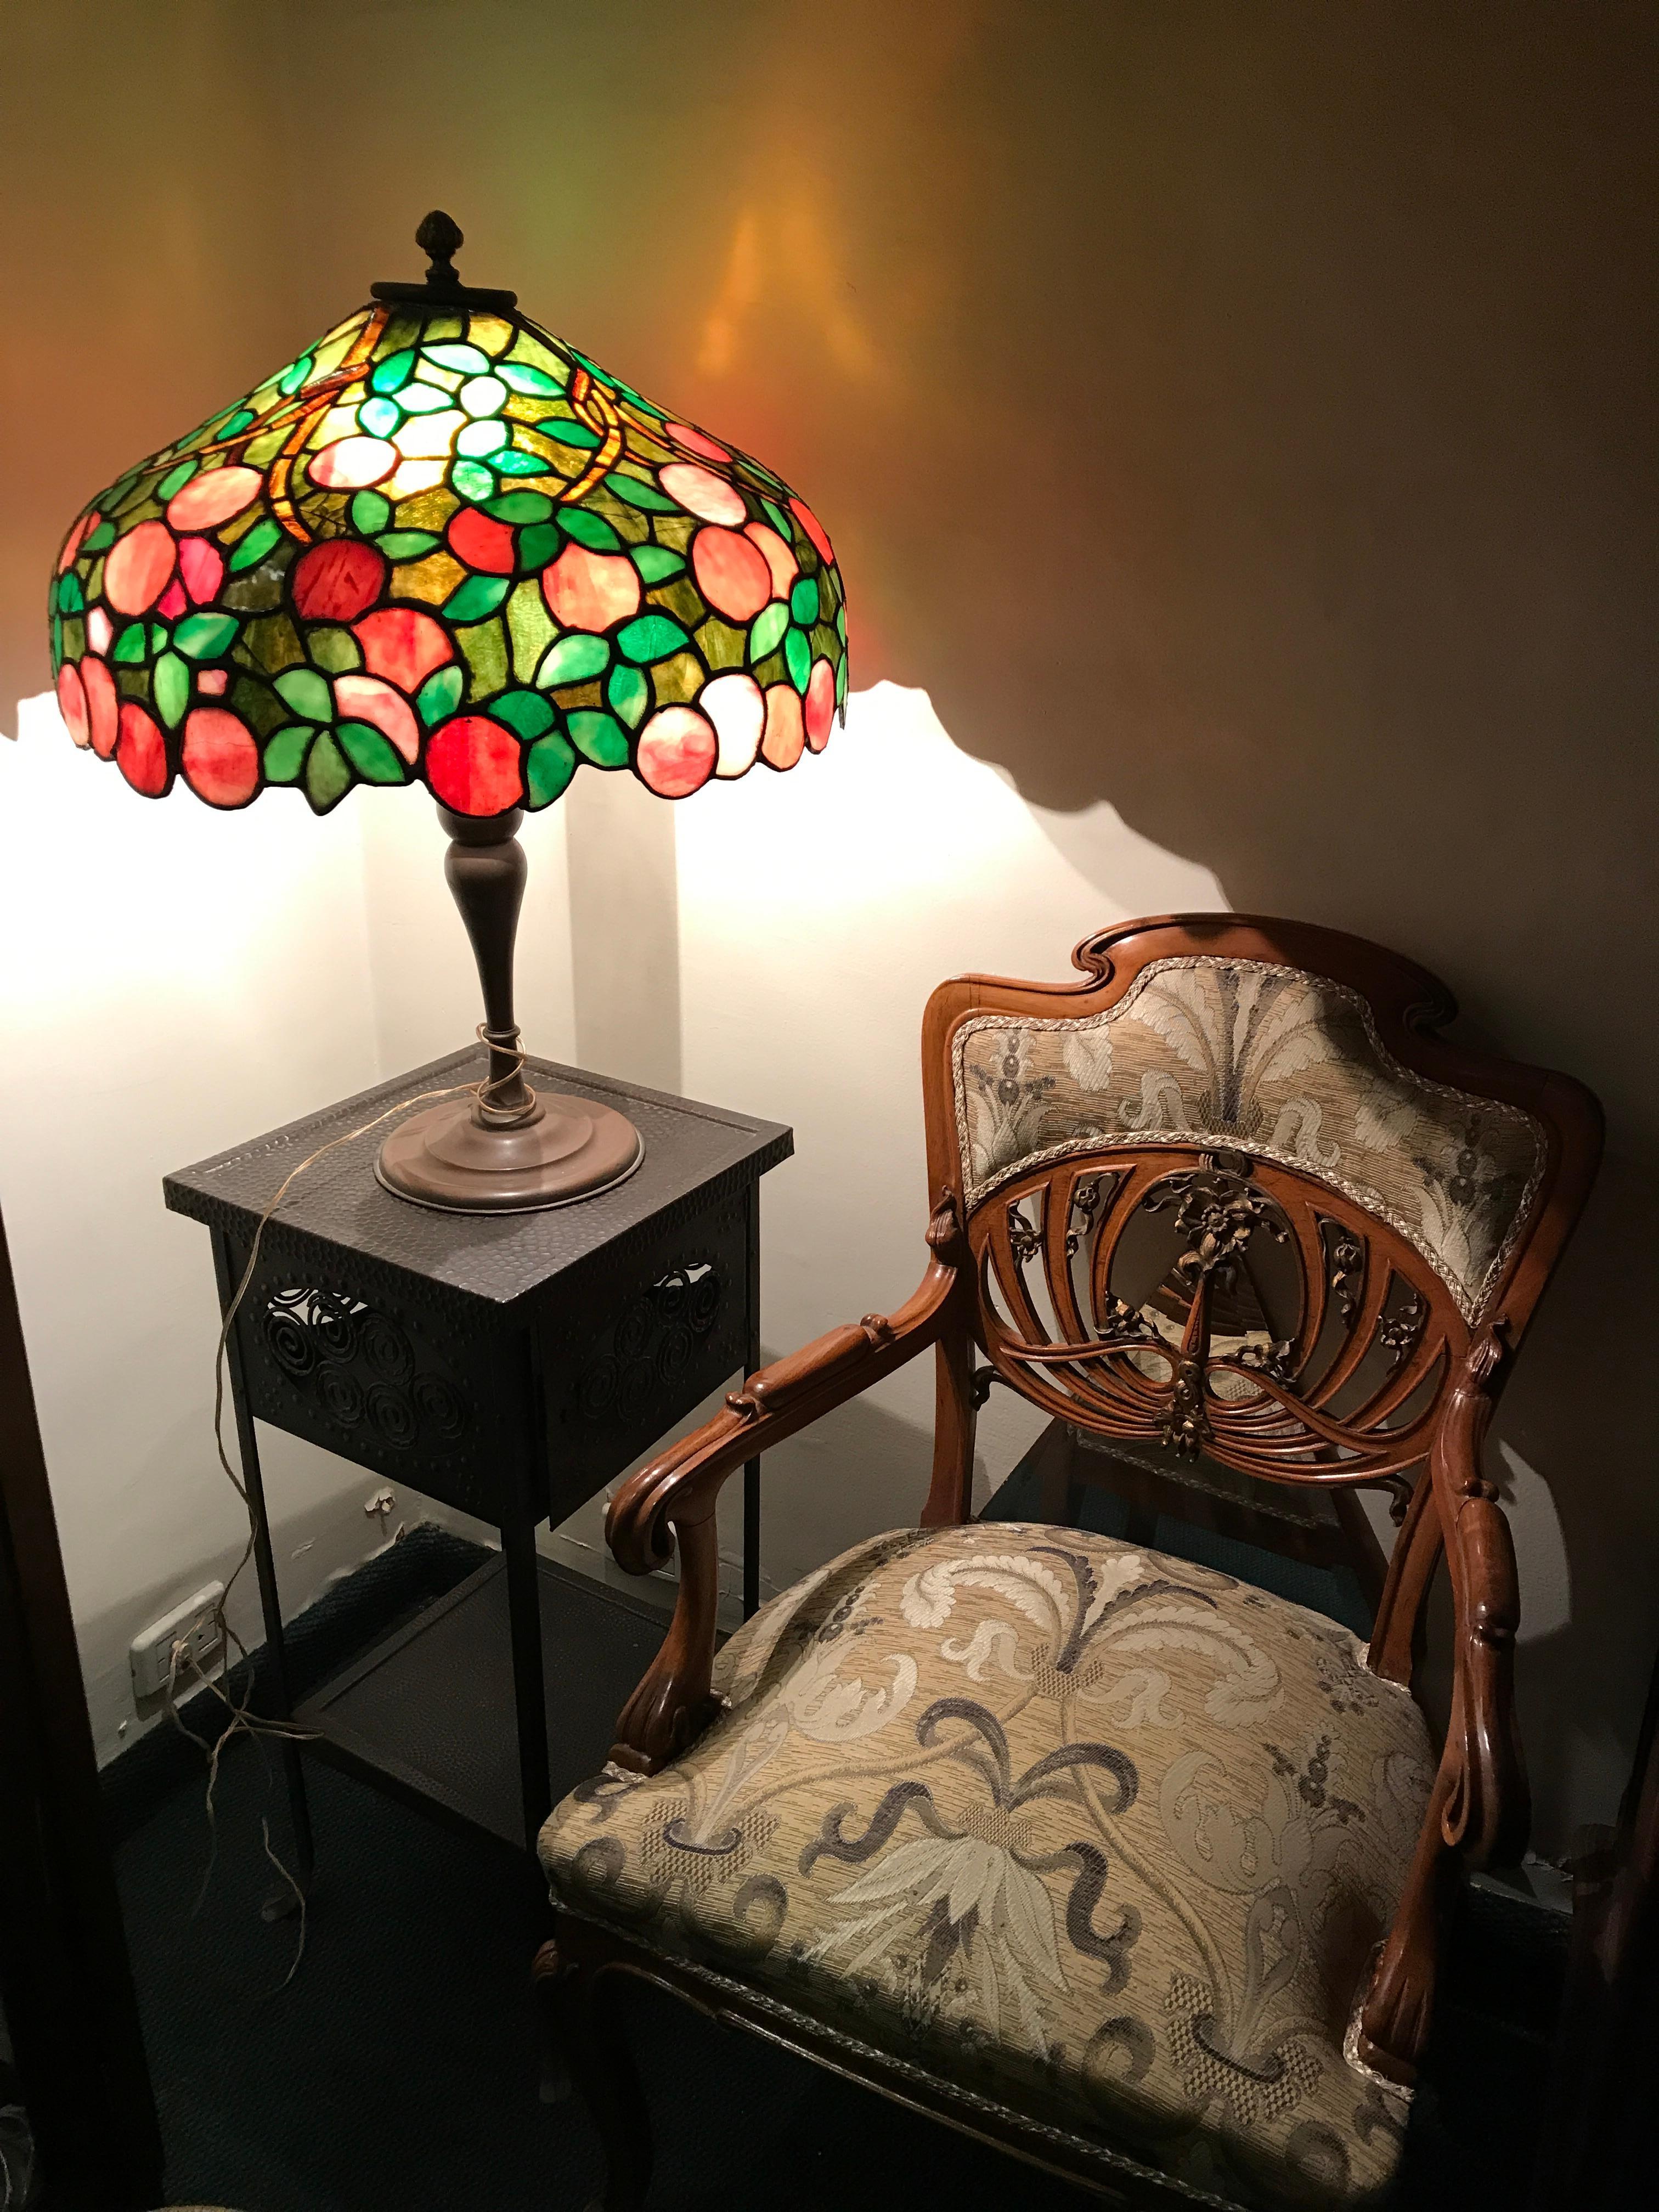 Incredible Art Nouveau Game.
The price includes the 3 armchairs
1 Sofa
2 Armchairs

Material: Wood, reupholstered with springs and elastic band (as it was in the old days)
If you have any questions we are at your disposal.
Pushing the button that